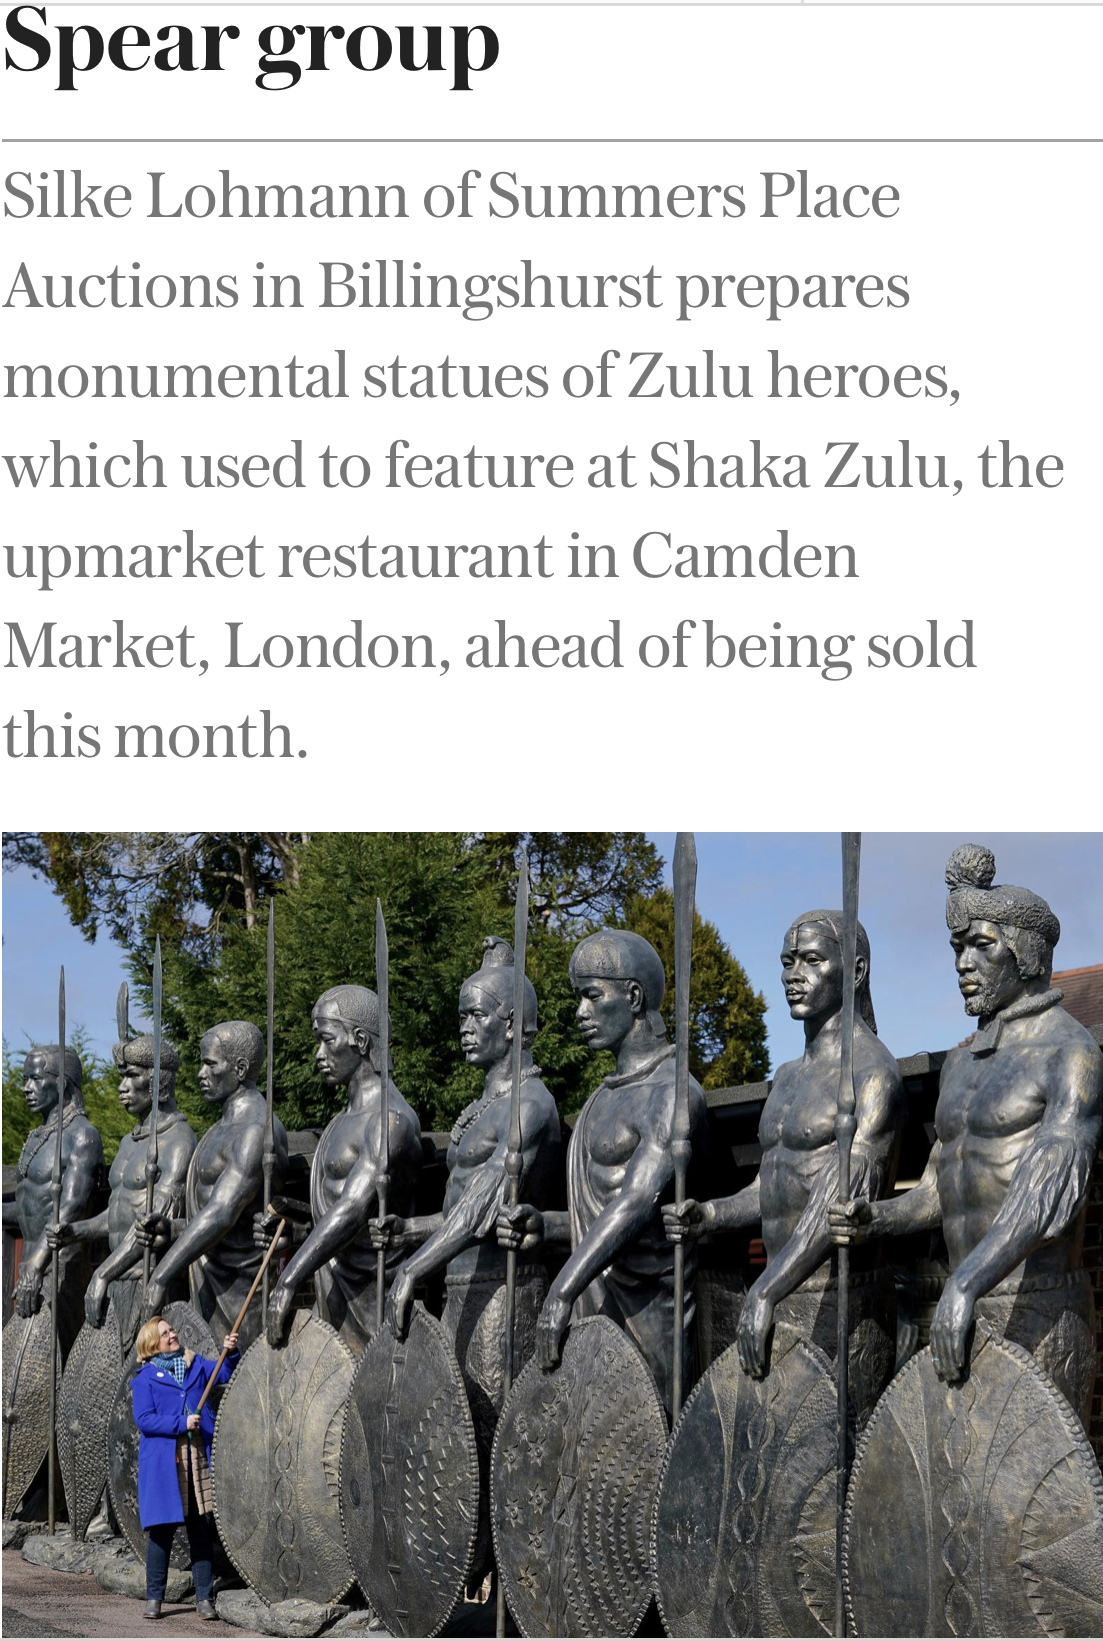 <strong>Summers Place Auctions to Celebrate Shaka Zulu</strong>